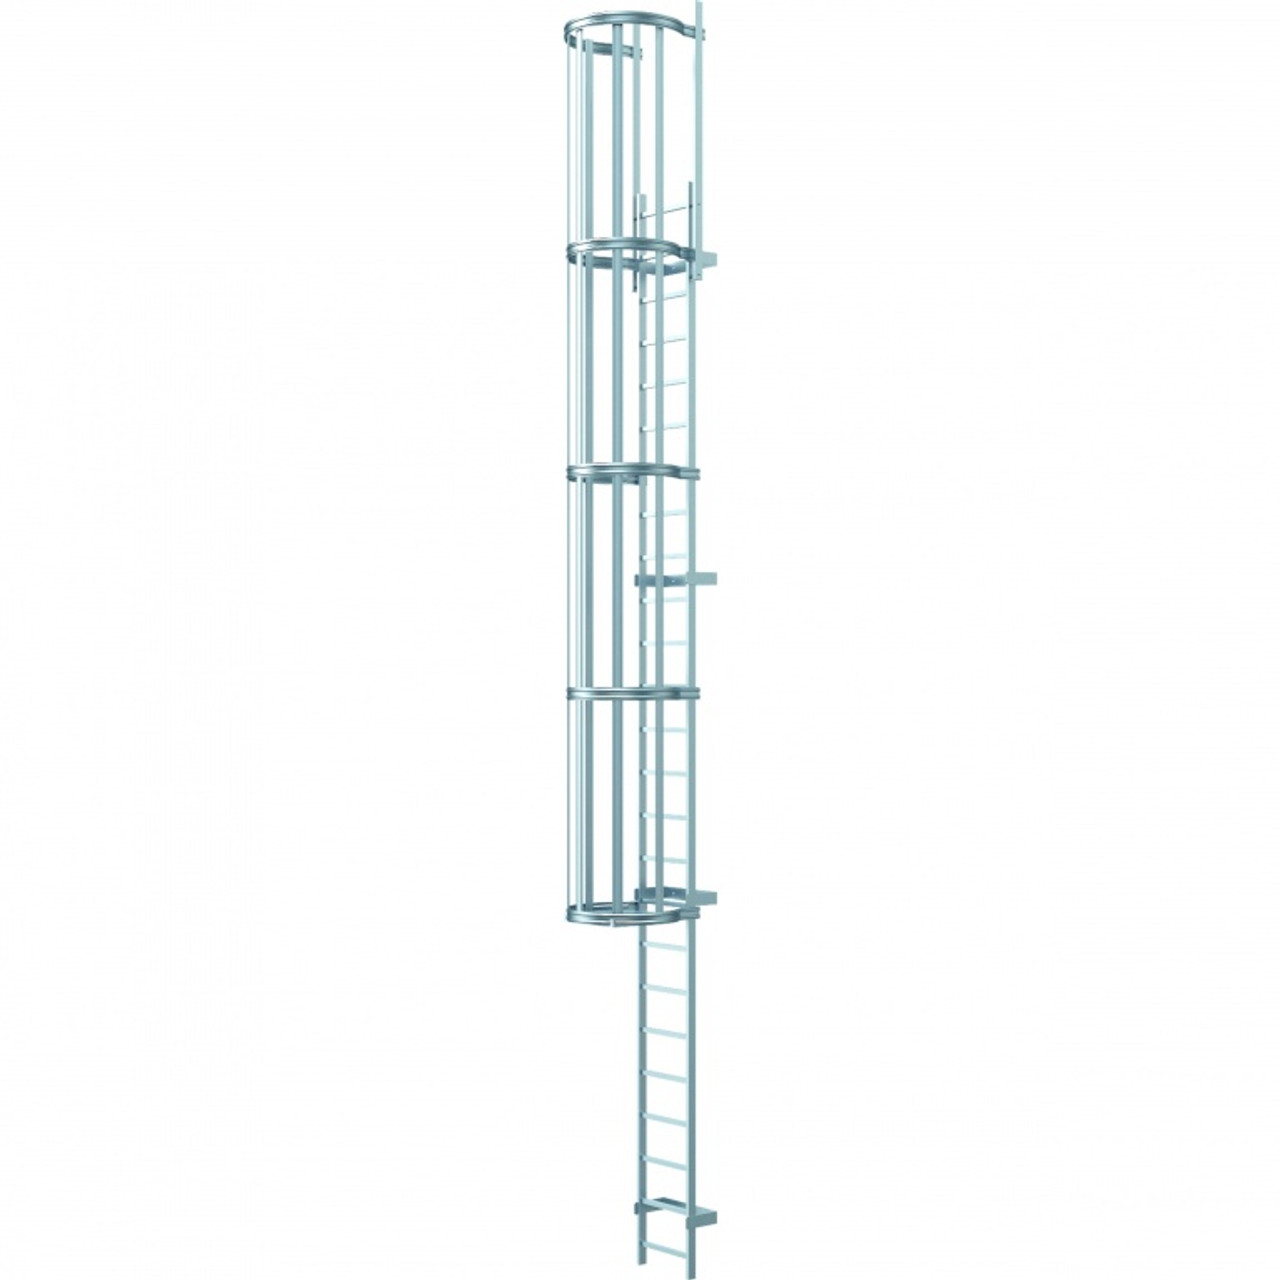 Zarges Galvanised Mild Steel Fixed Access Ladders - Ladders.co.uk